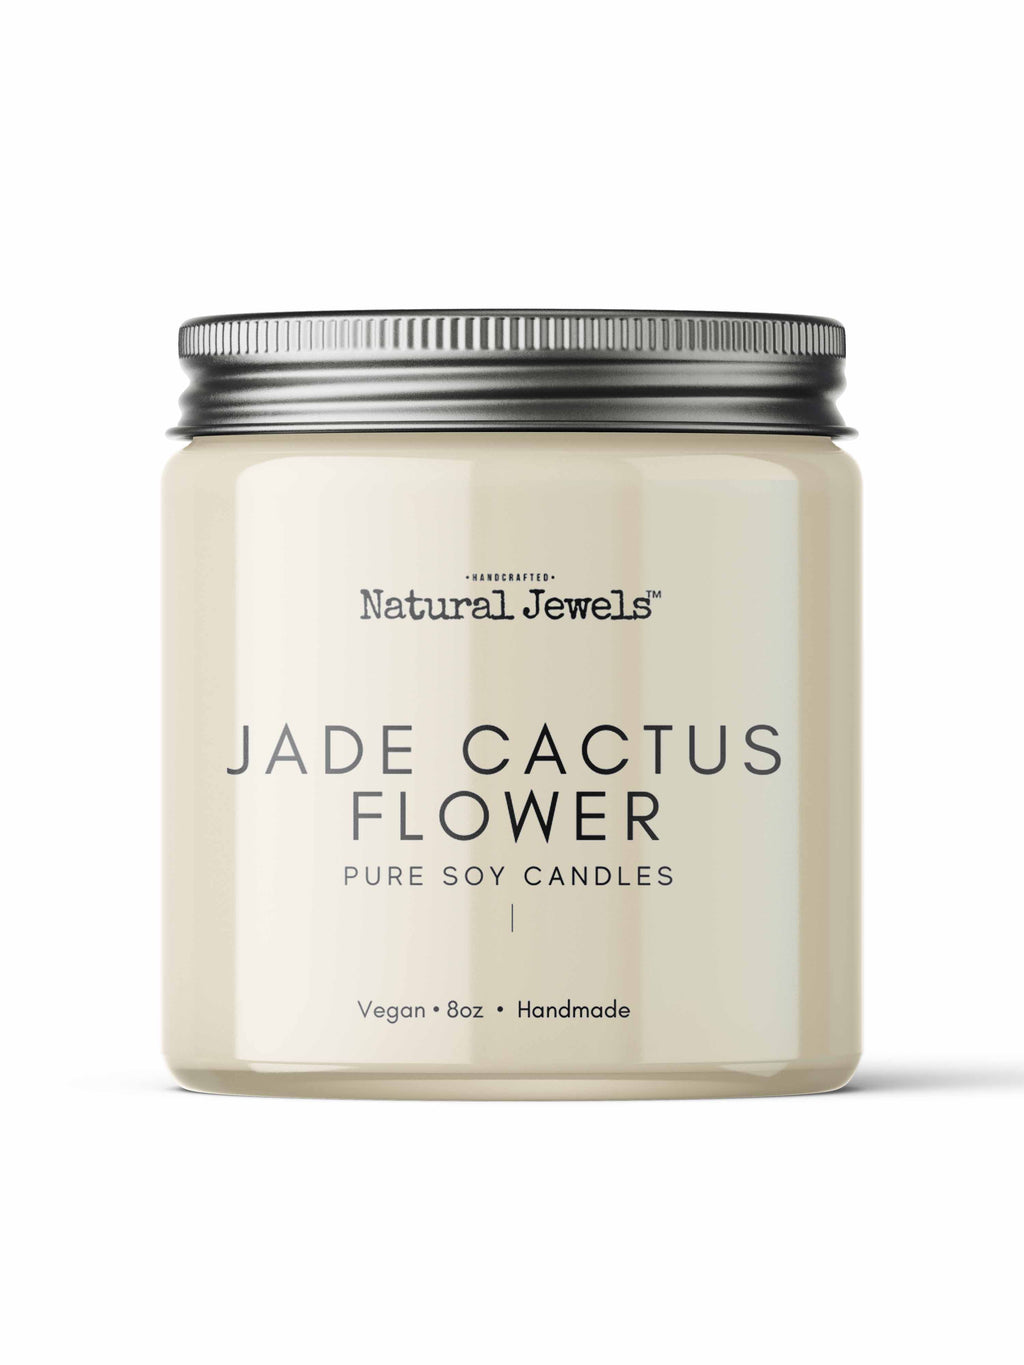 Jade Cactus Flower Soy Wax Candle